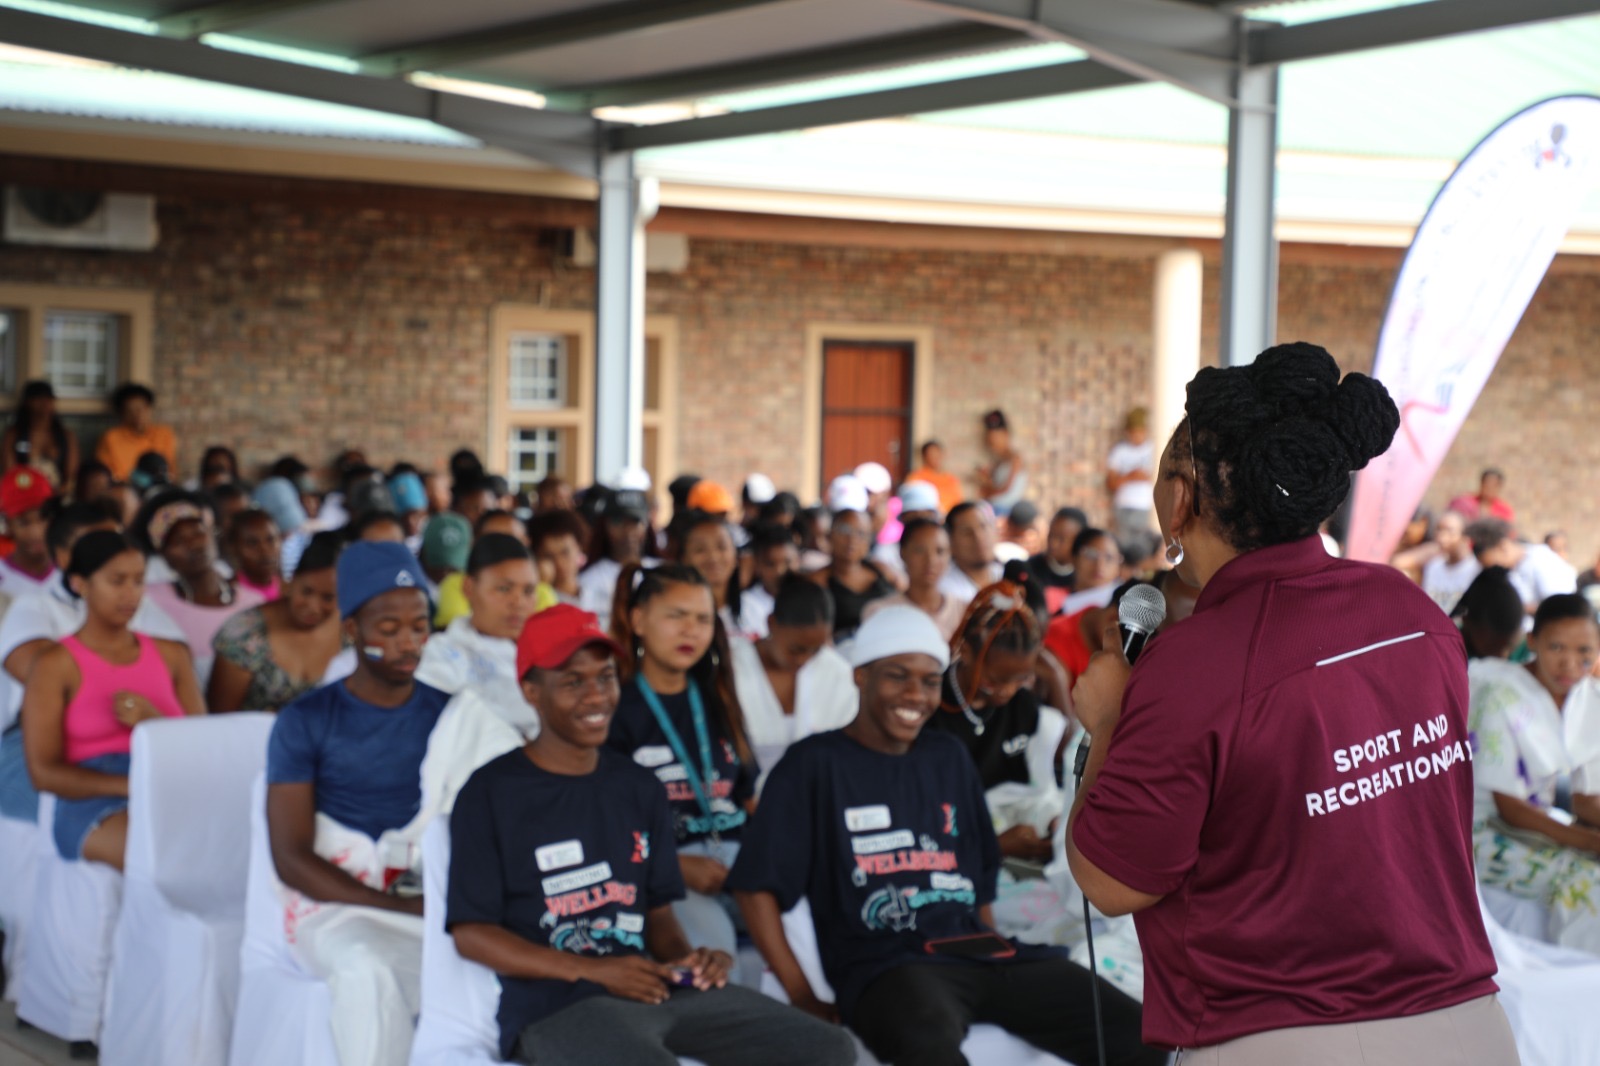 Minister Professor Nomafrench Mbombo engaging with students on the importance of sexual and reproductive health matters and how it affects the overall health of the youth.